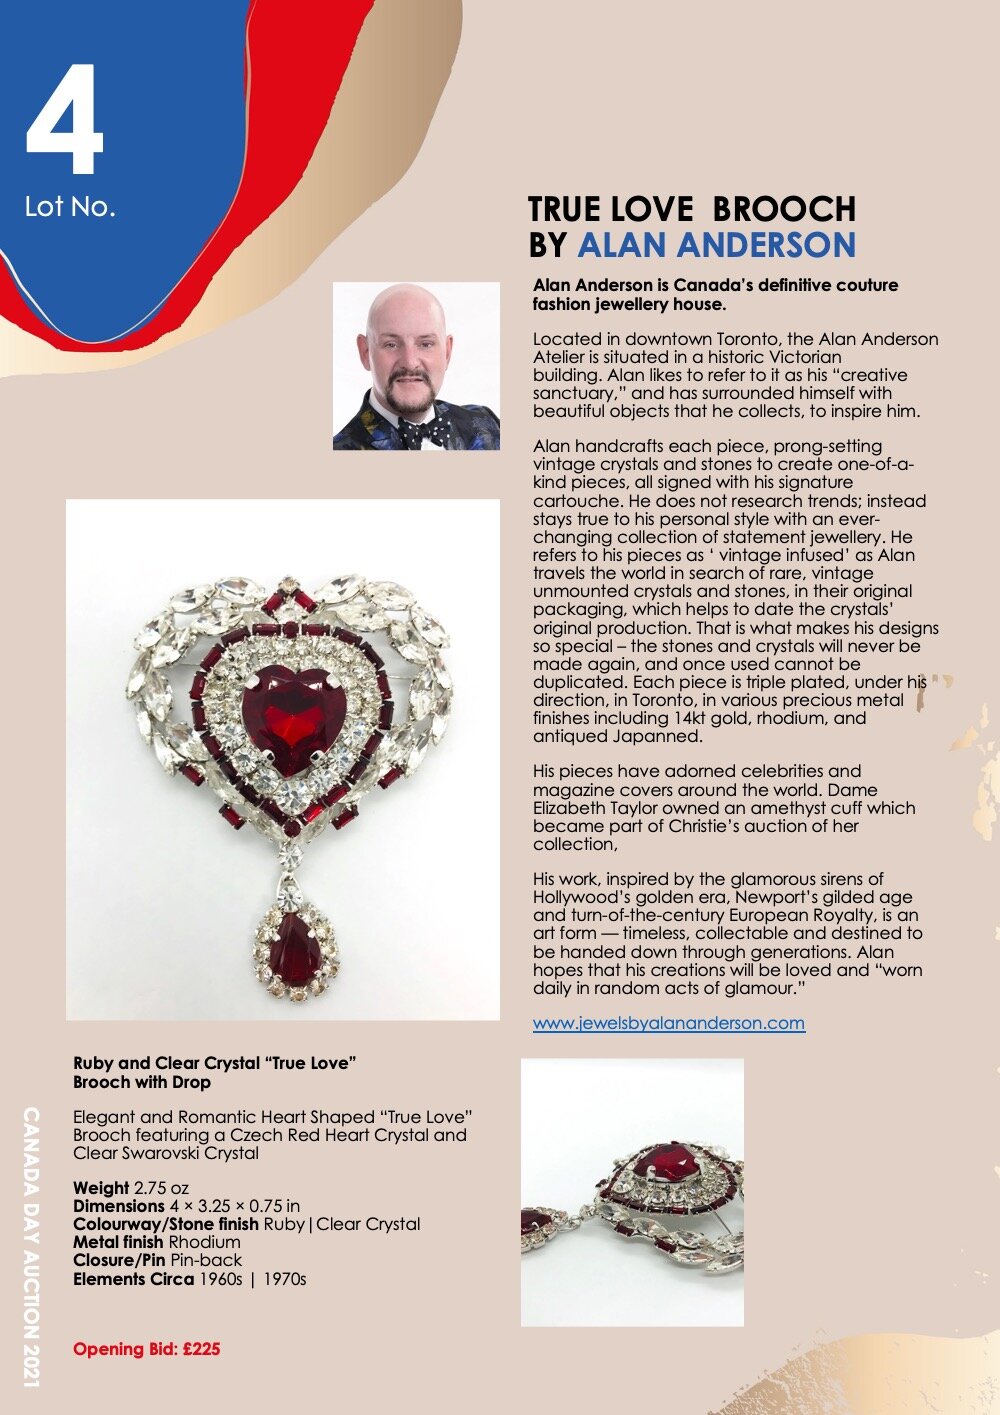   Lot 4: BY ALAN ANDERSON     TRUE LOVE BROOCH     Alan Anderson is Canada’s definitive couture fashion jewellery house.    Located in downtown Toronto, the Alan Anderson Atelier is situated in a historic Victorian  building. Alan likes to refer to i